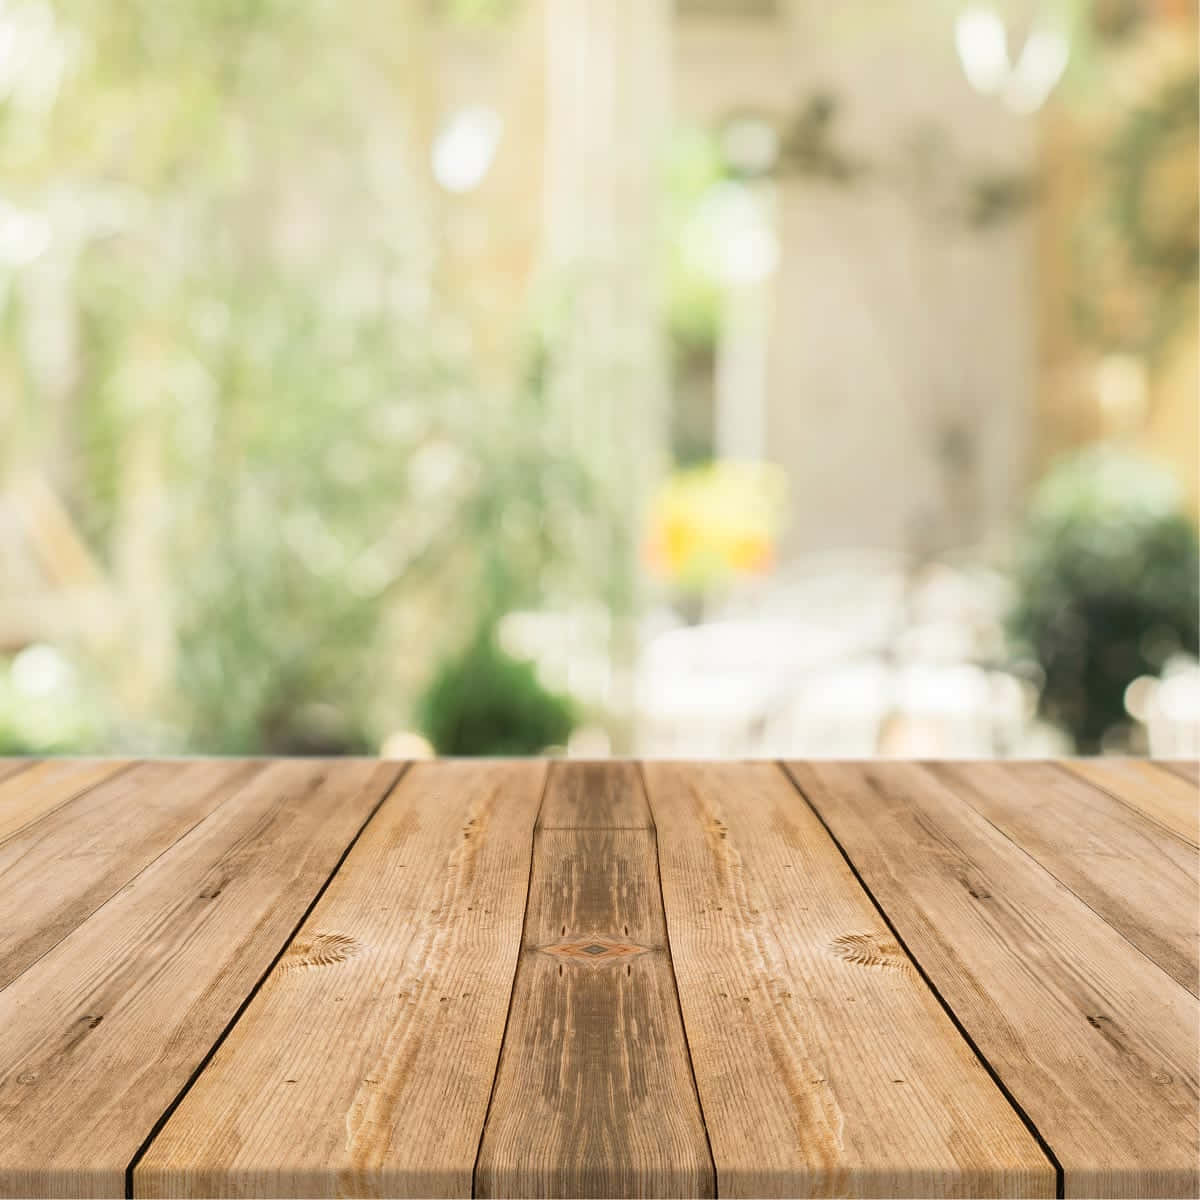 Wooden Table Surface Microsoft Teams Blur Background